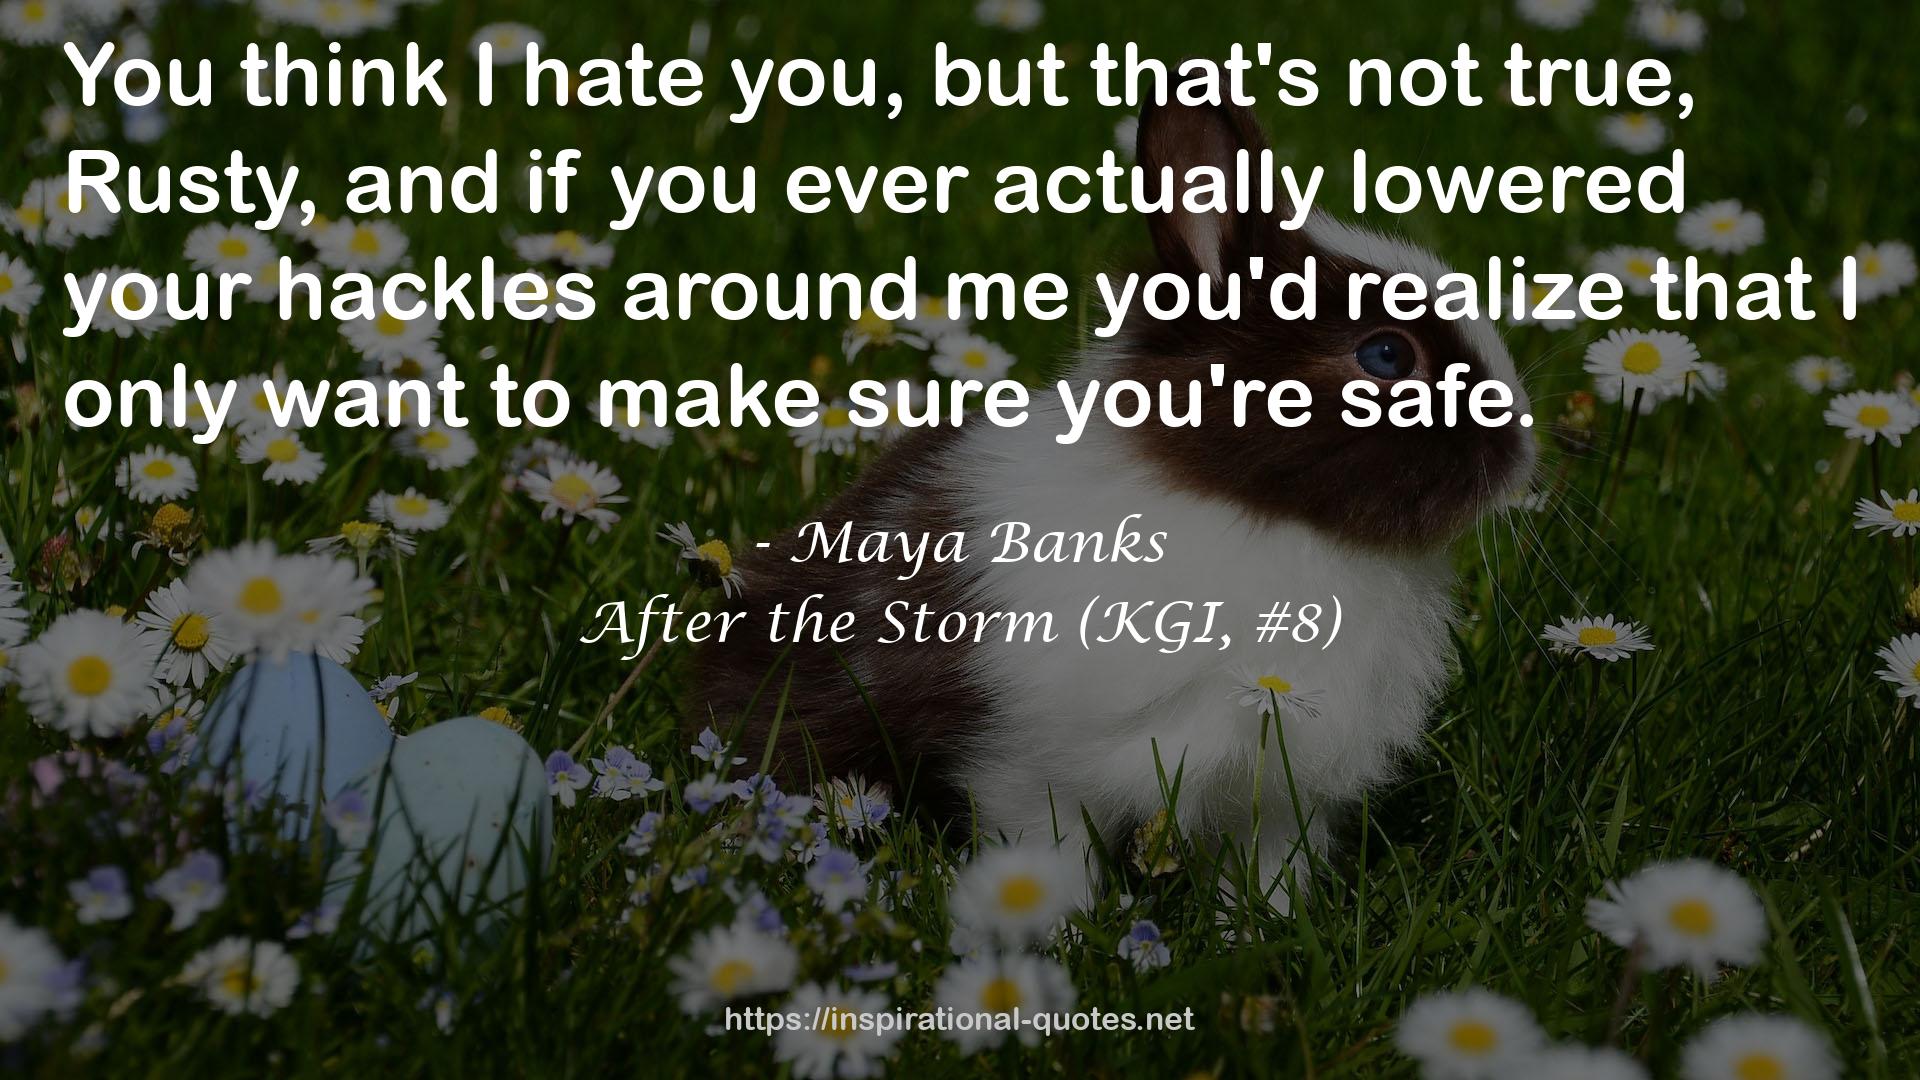 After the Storm (KGI, #8) QUOTES